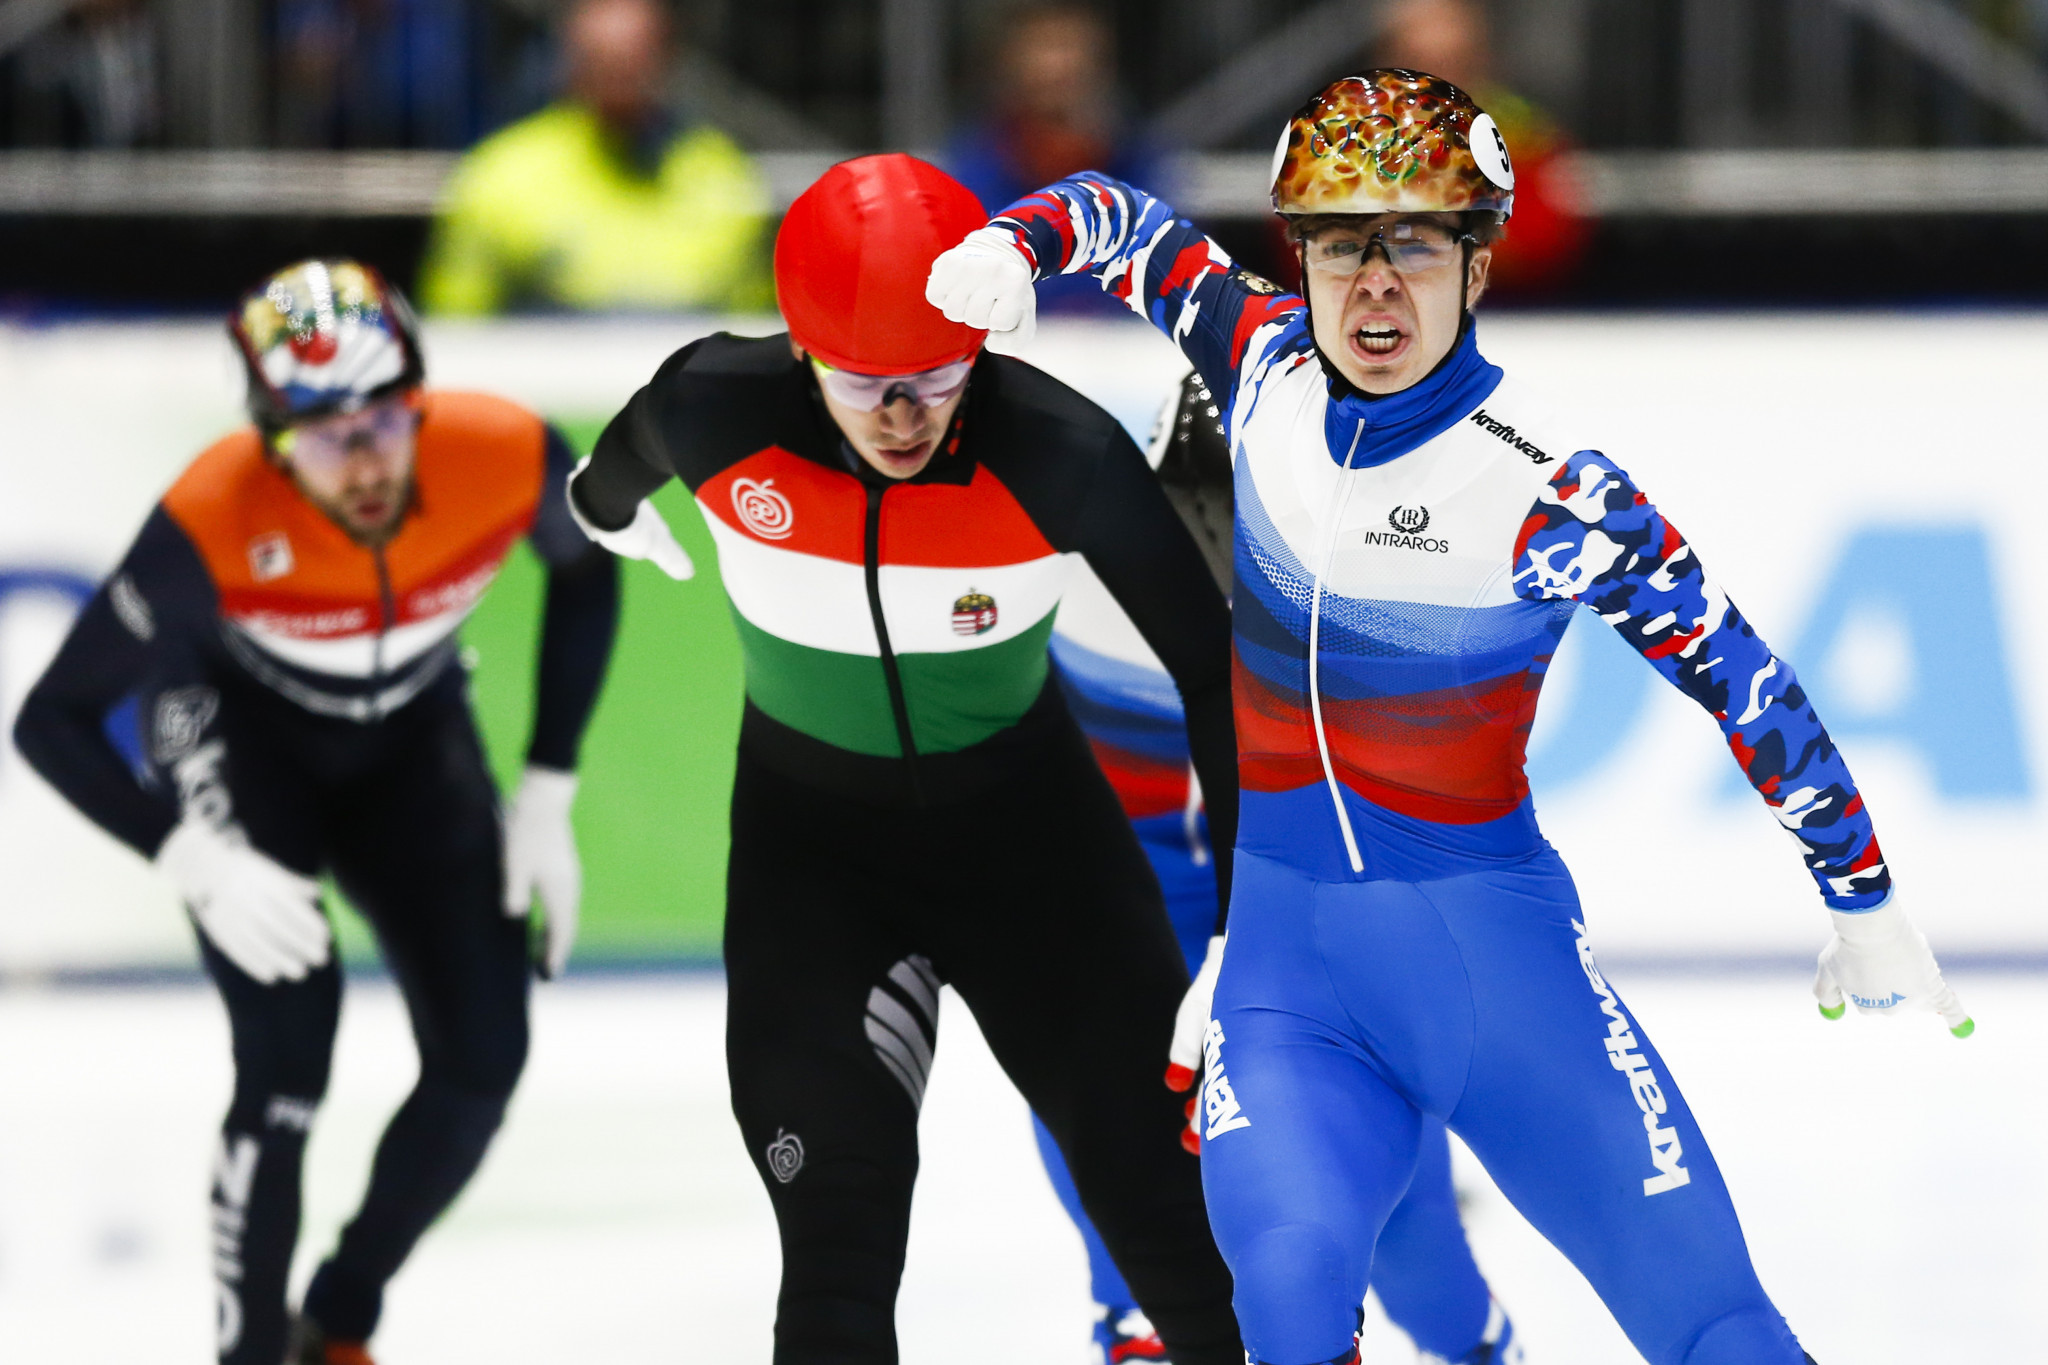 Semen Elistratov, right, of Russia celebrates winning the 1,000m final before Shaolin Sandor Liu of Hungary at the ISU European Short Track Speed Skating Championships in Dordrecht, 2019. ©Getty Images